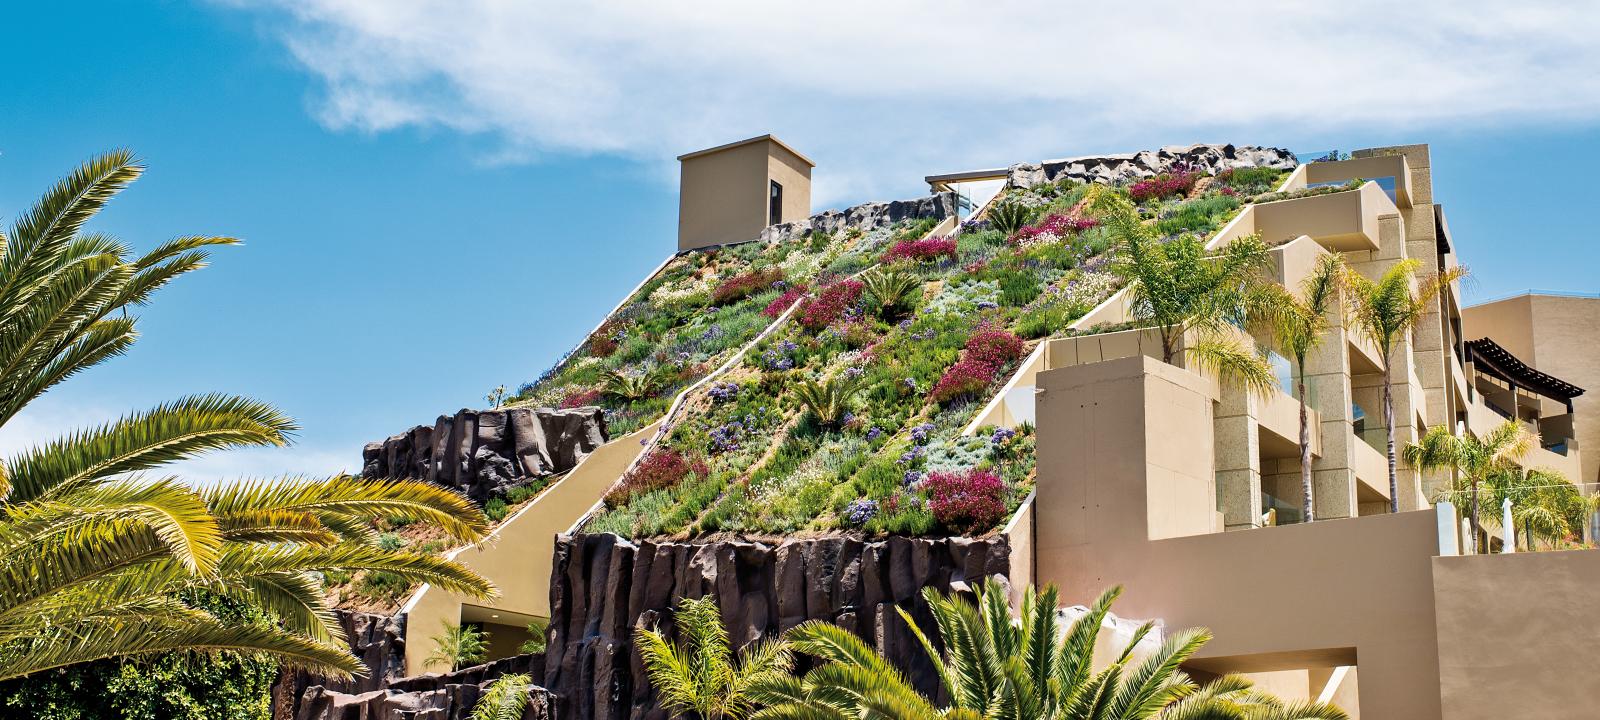 Steep pitched green roof in full blossom